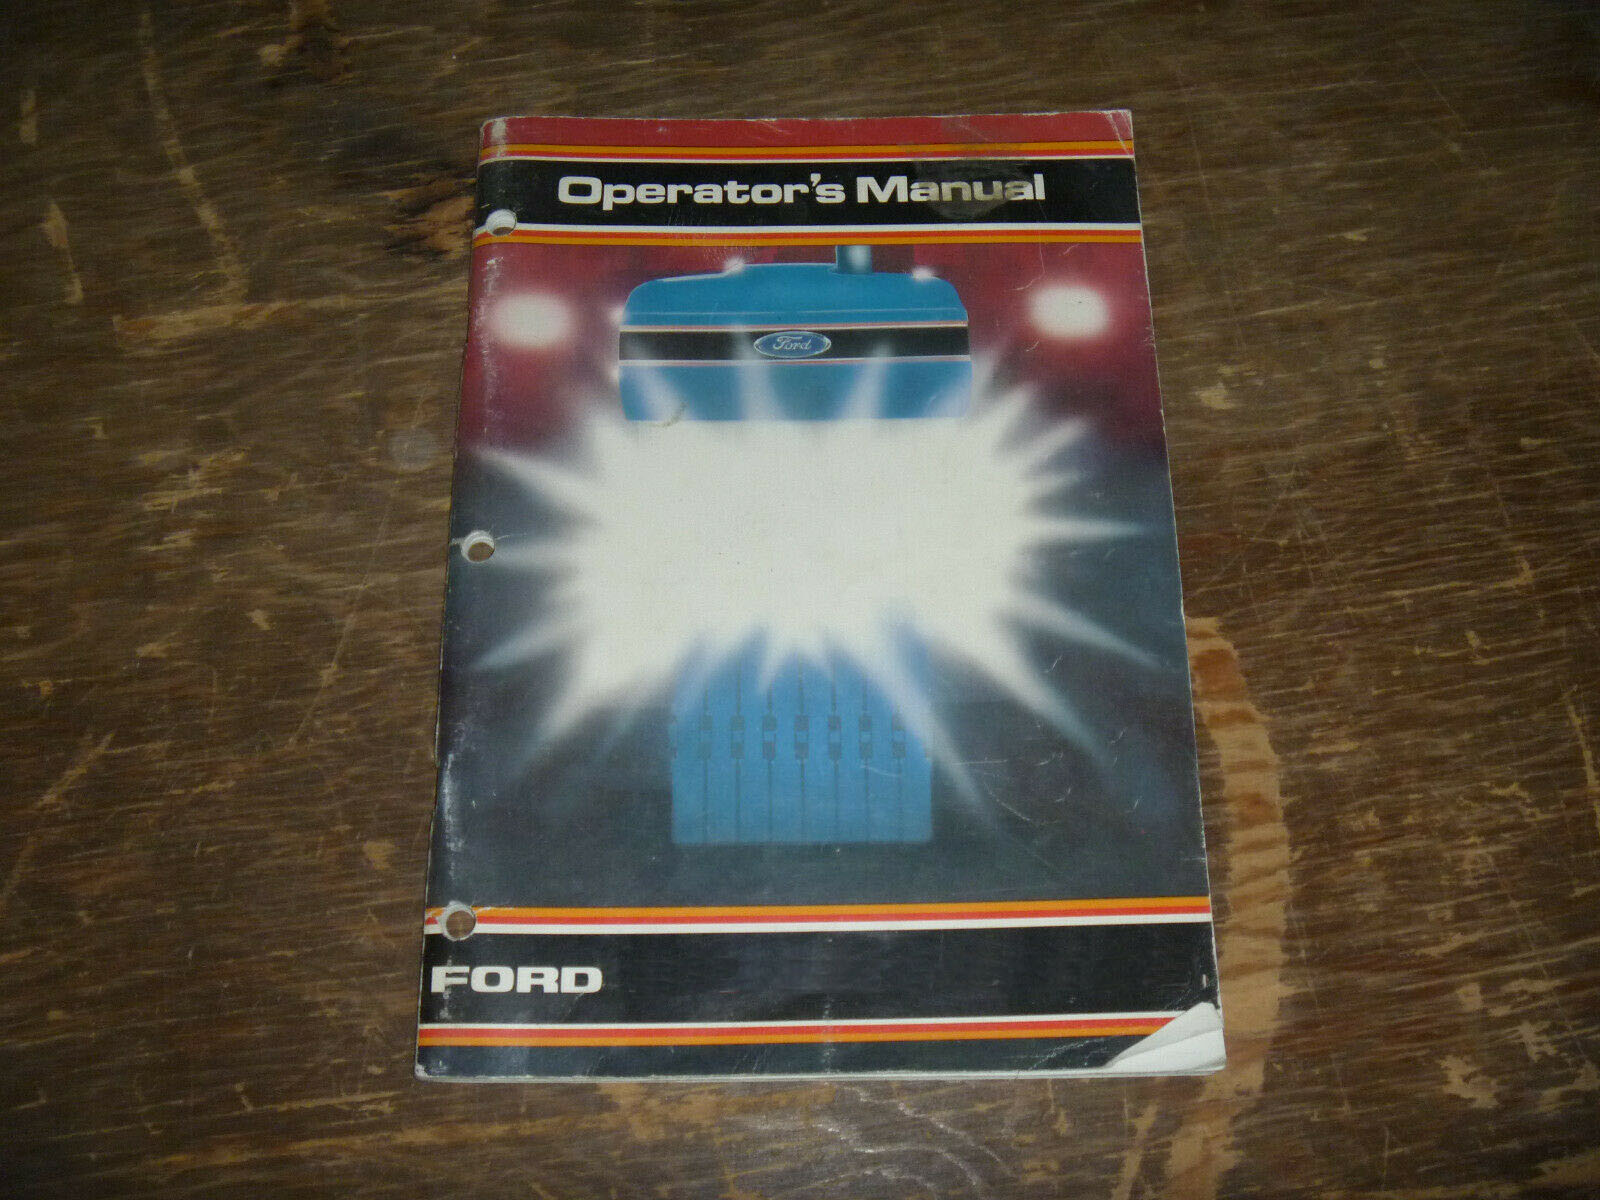 Operator's Manual for FORD Tractors model 3415